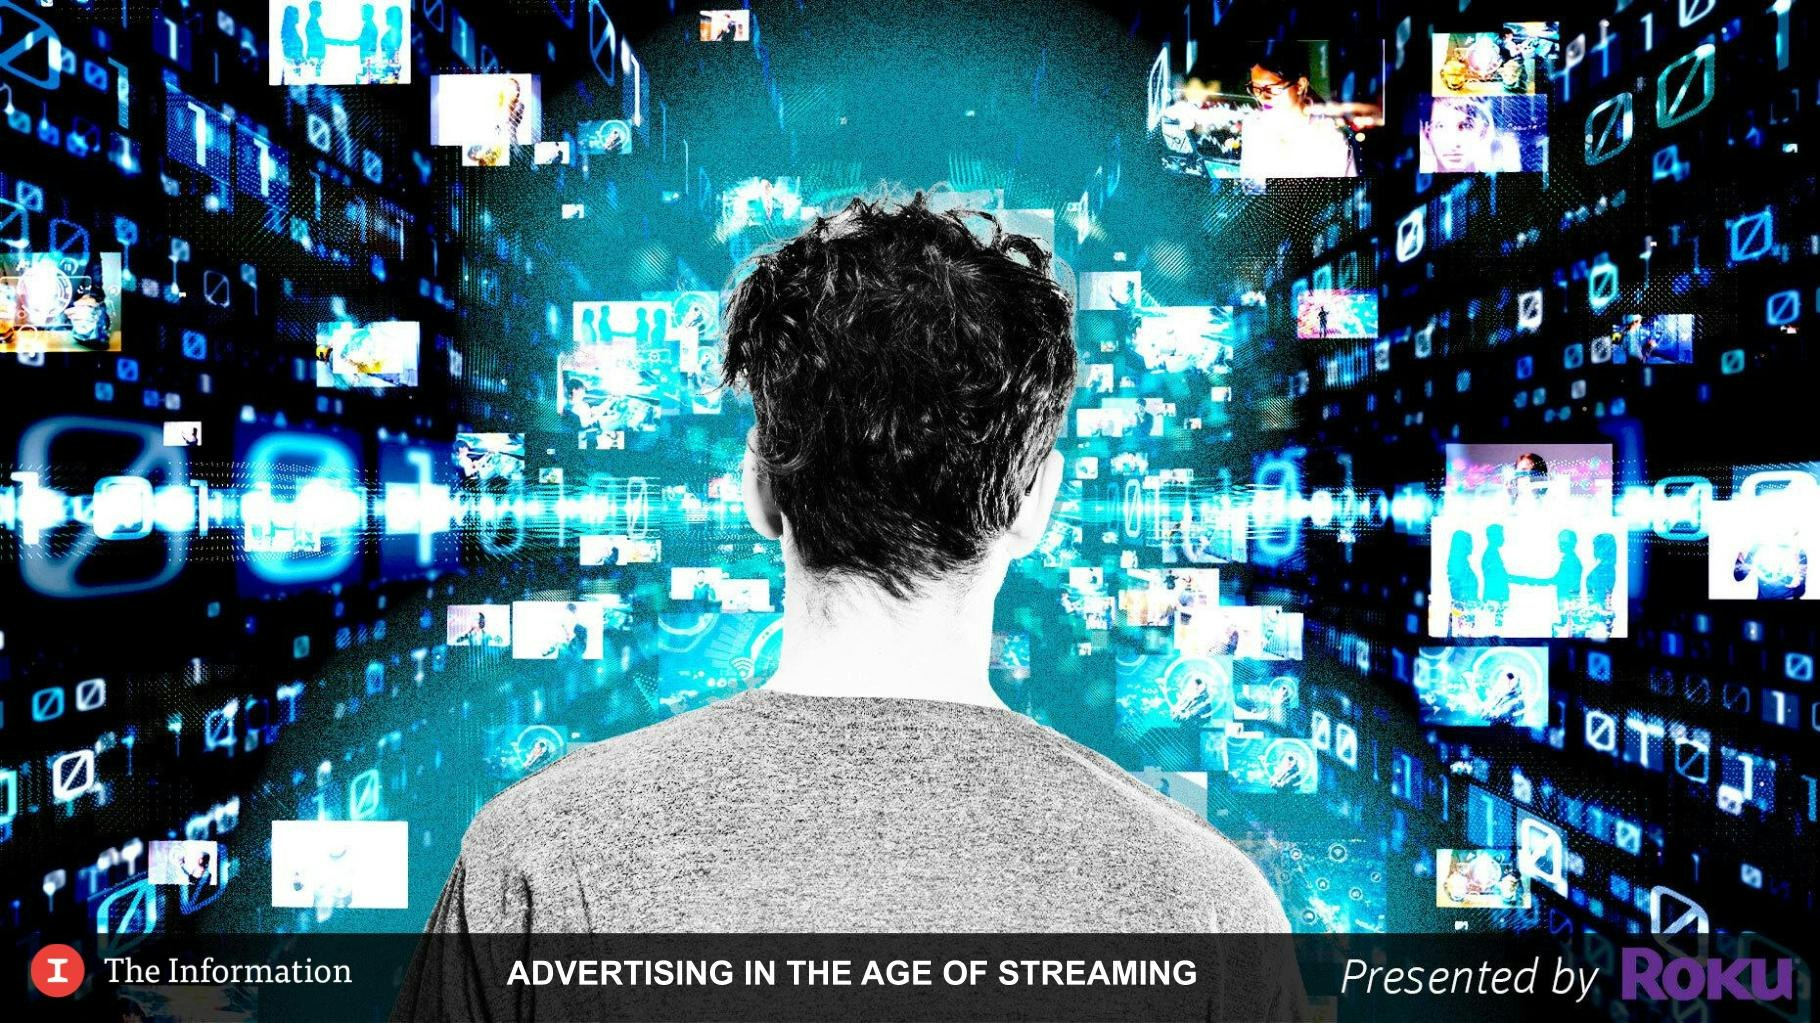 Advertising in the Age of Streaming